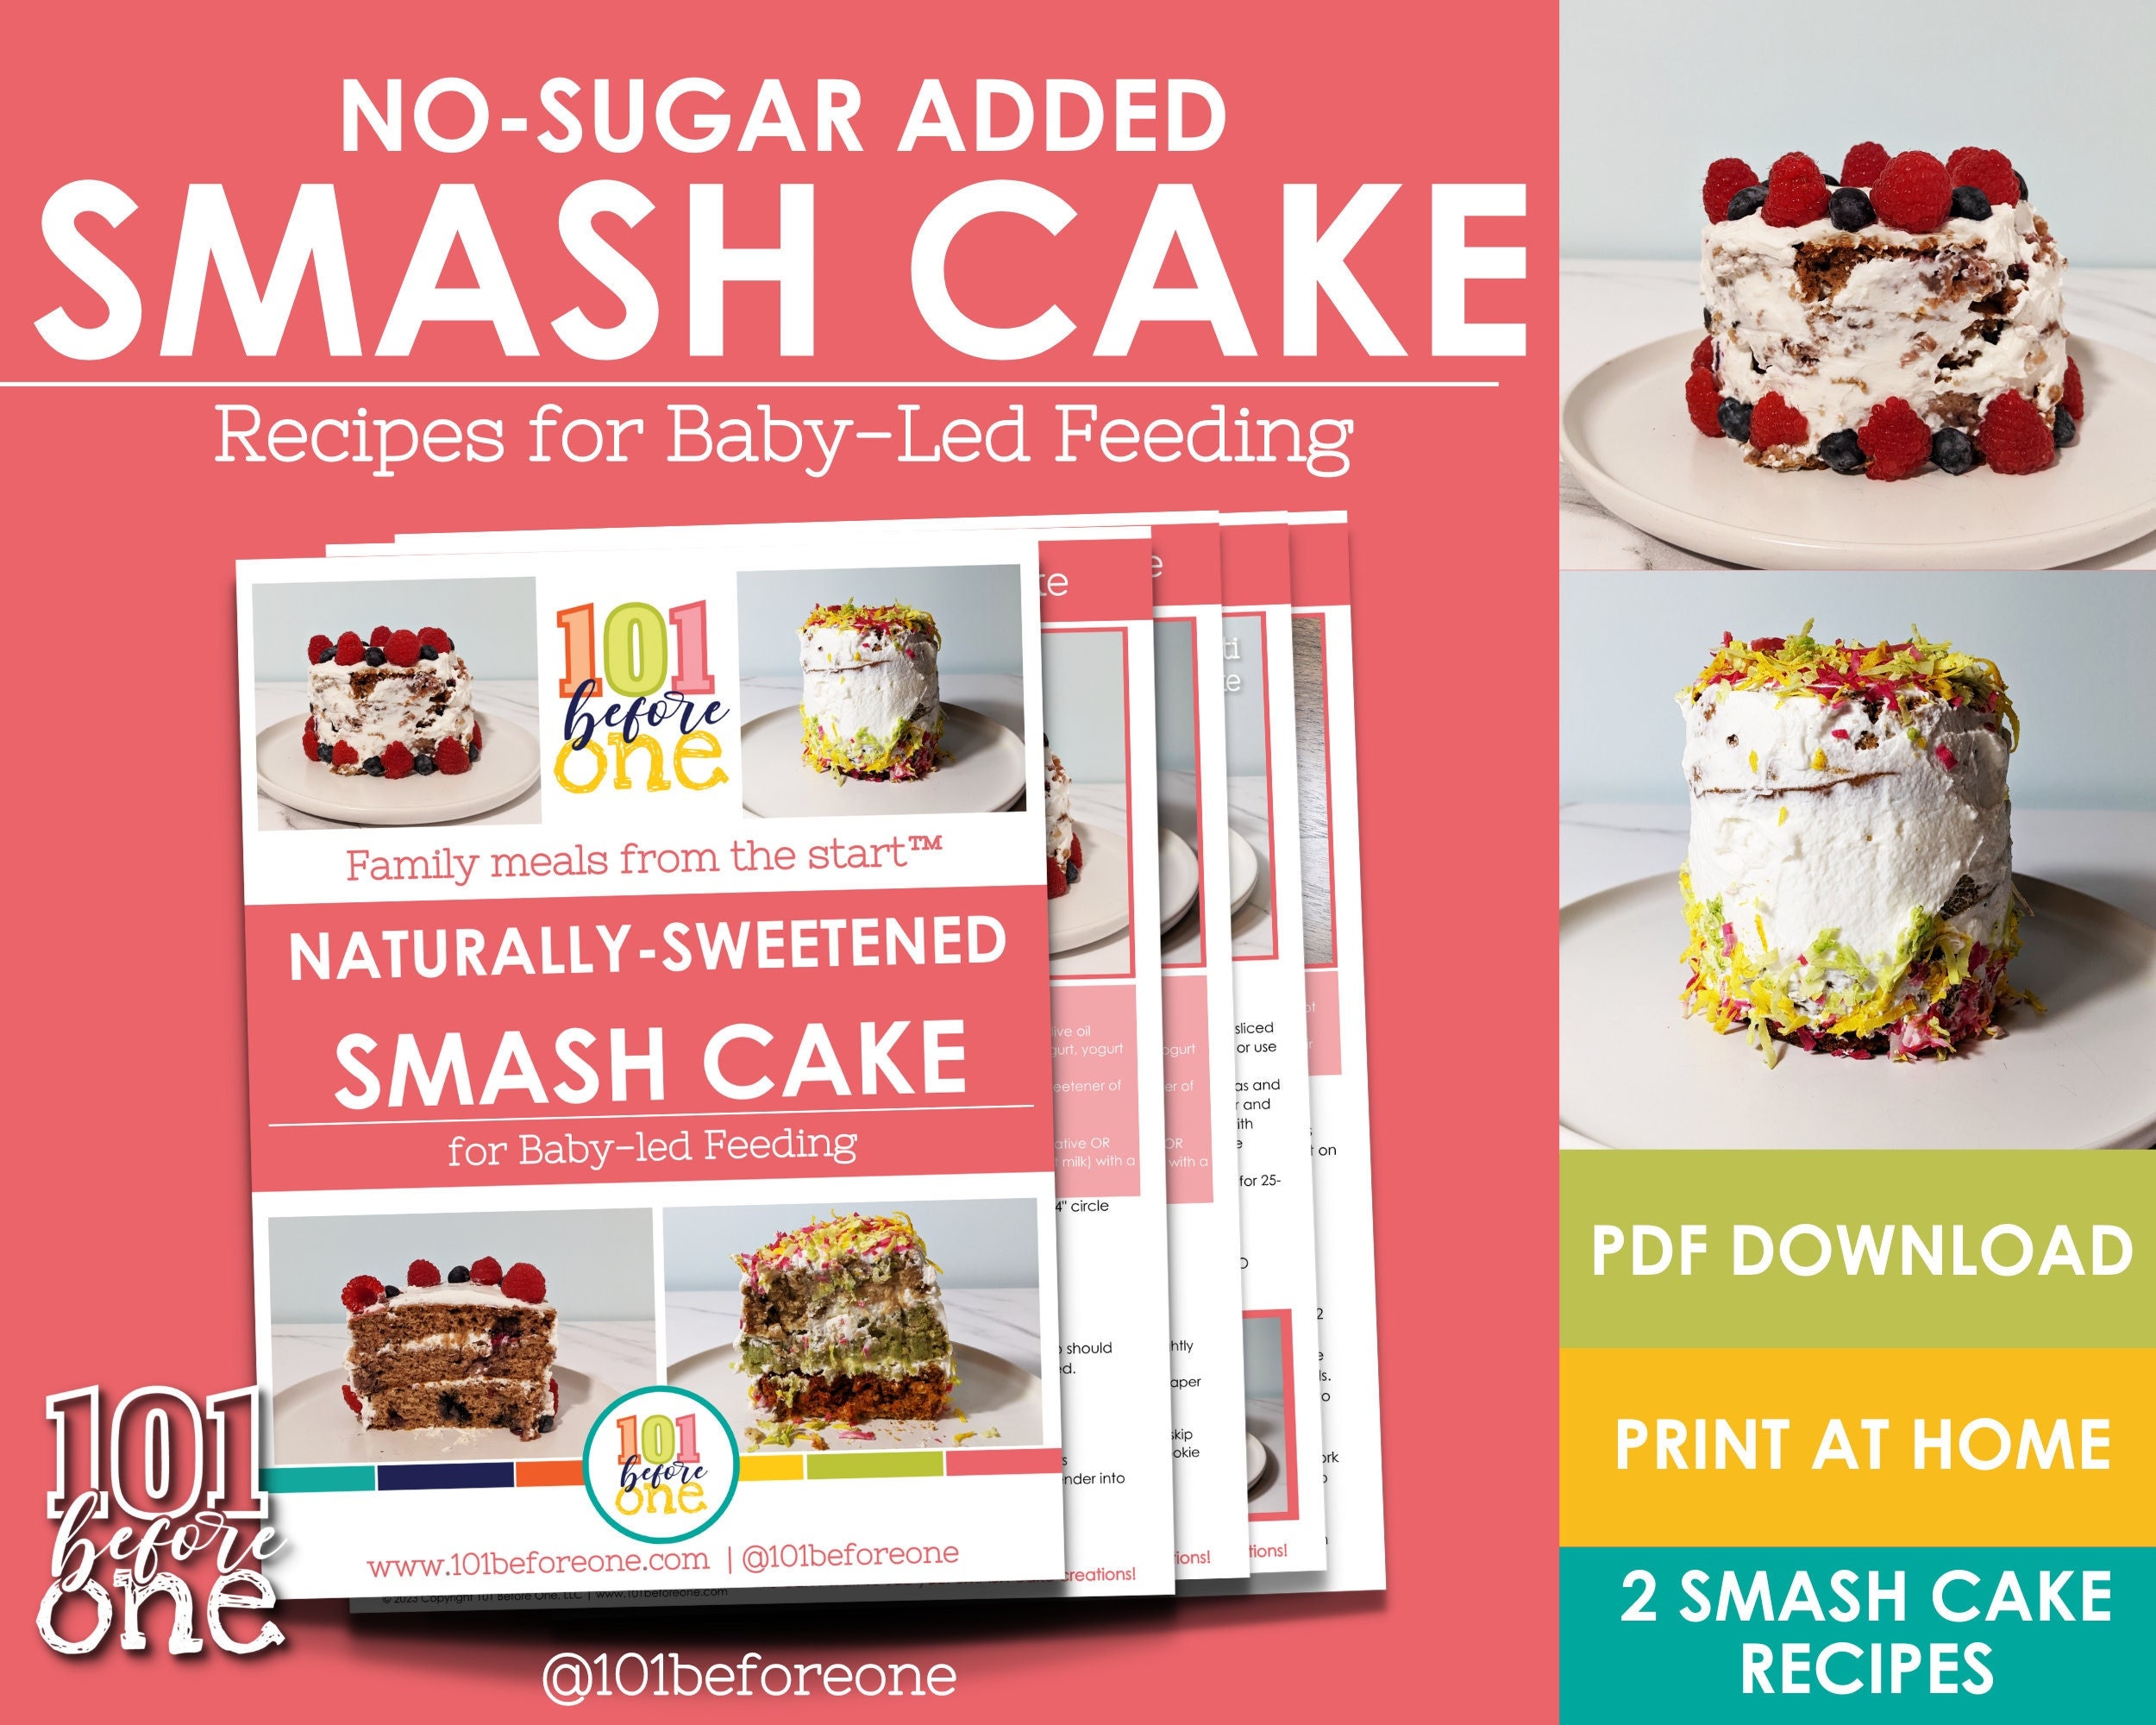 Homemade Smash Cake Recipe For Your Special Little One!